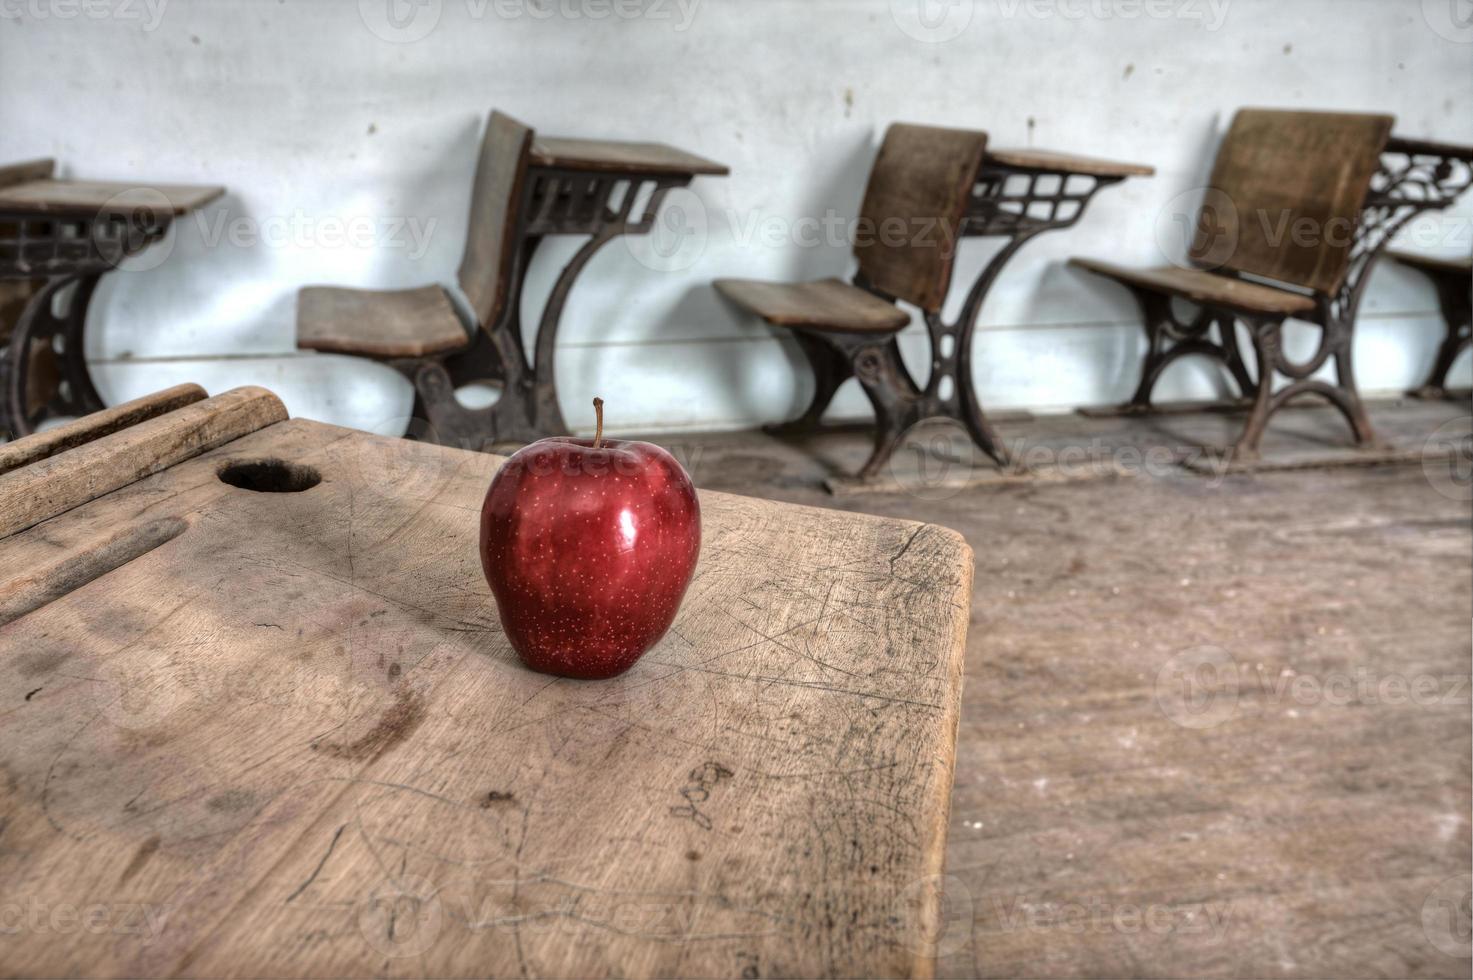 Abandoned School House red apple photo